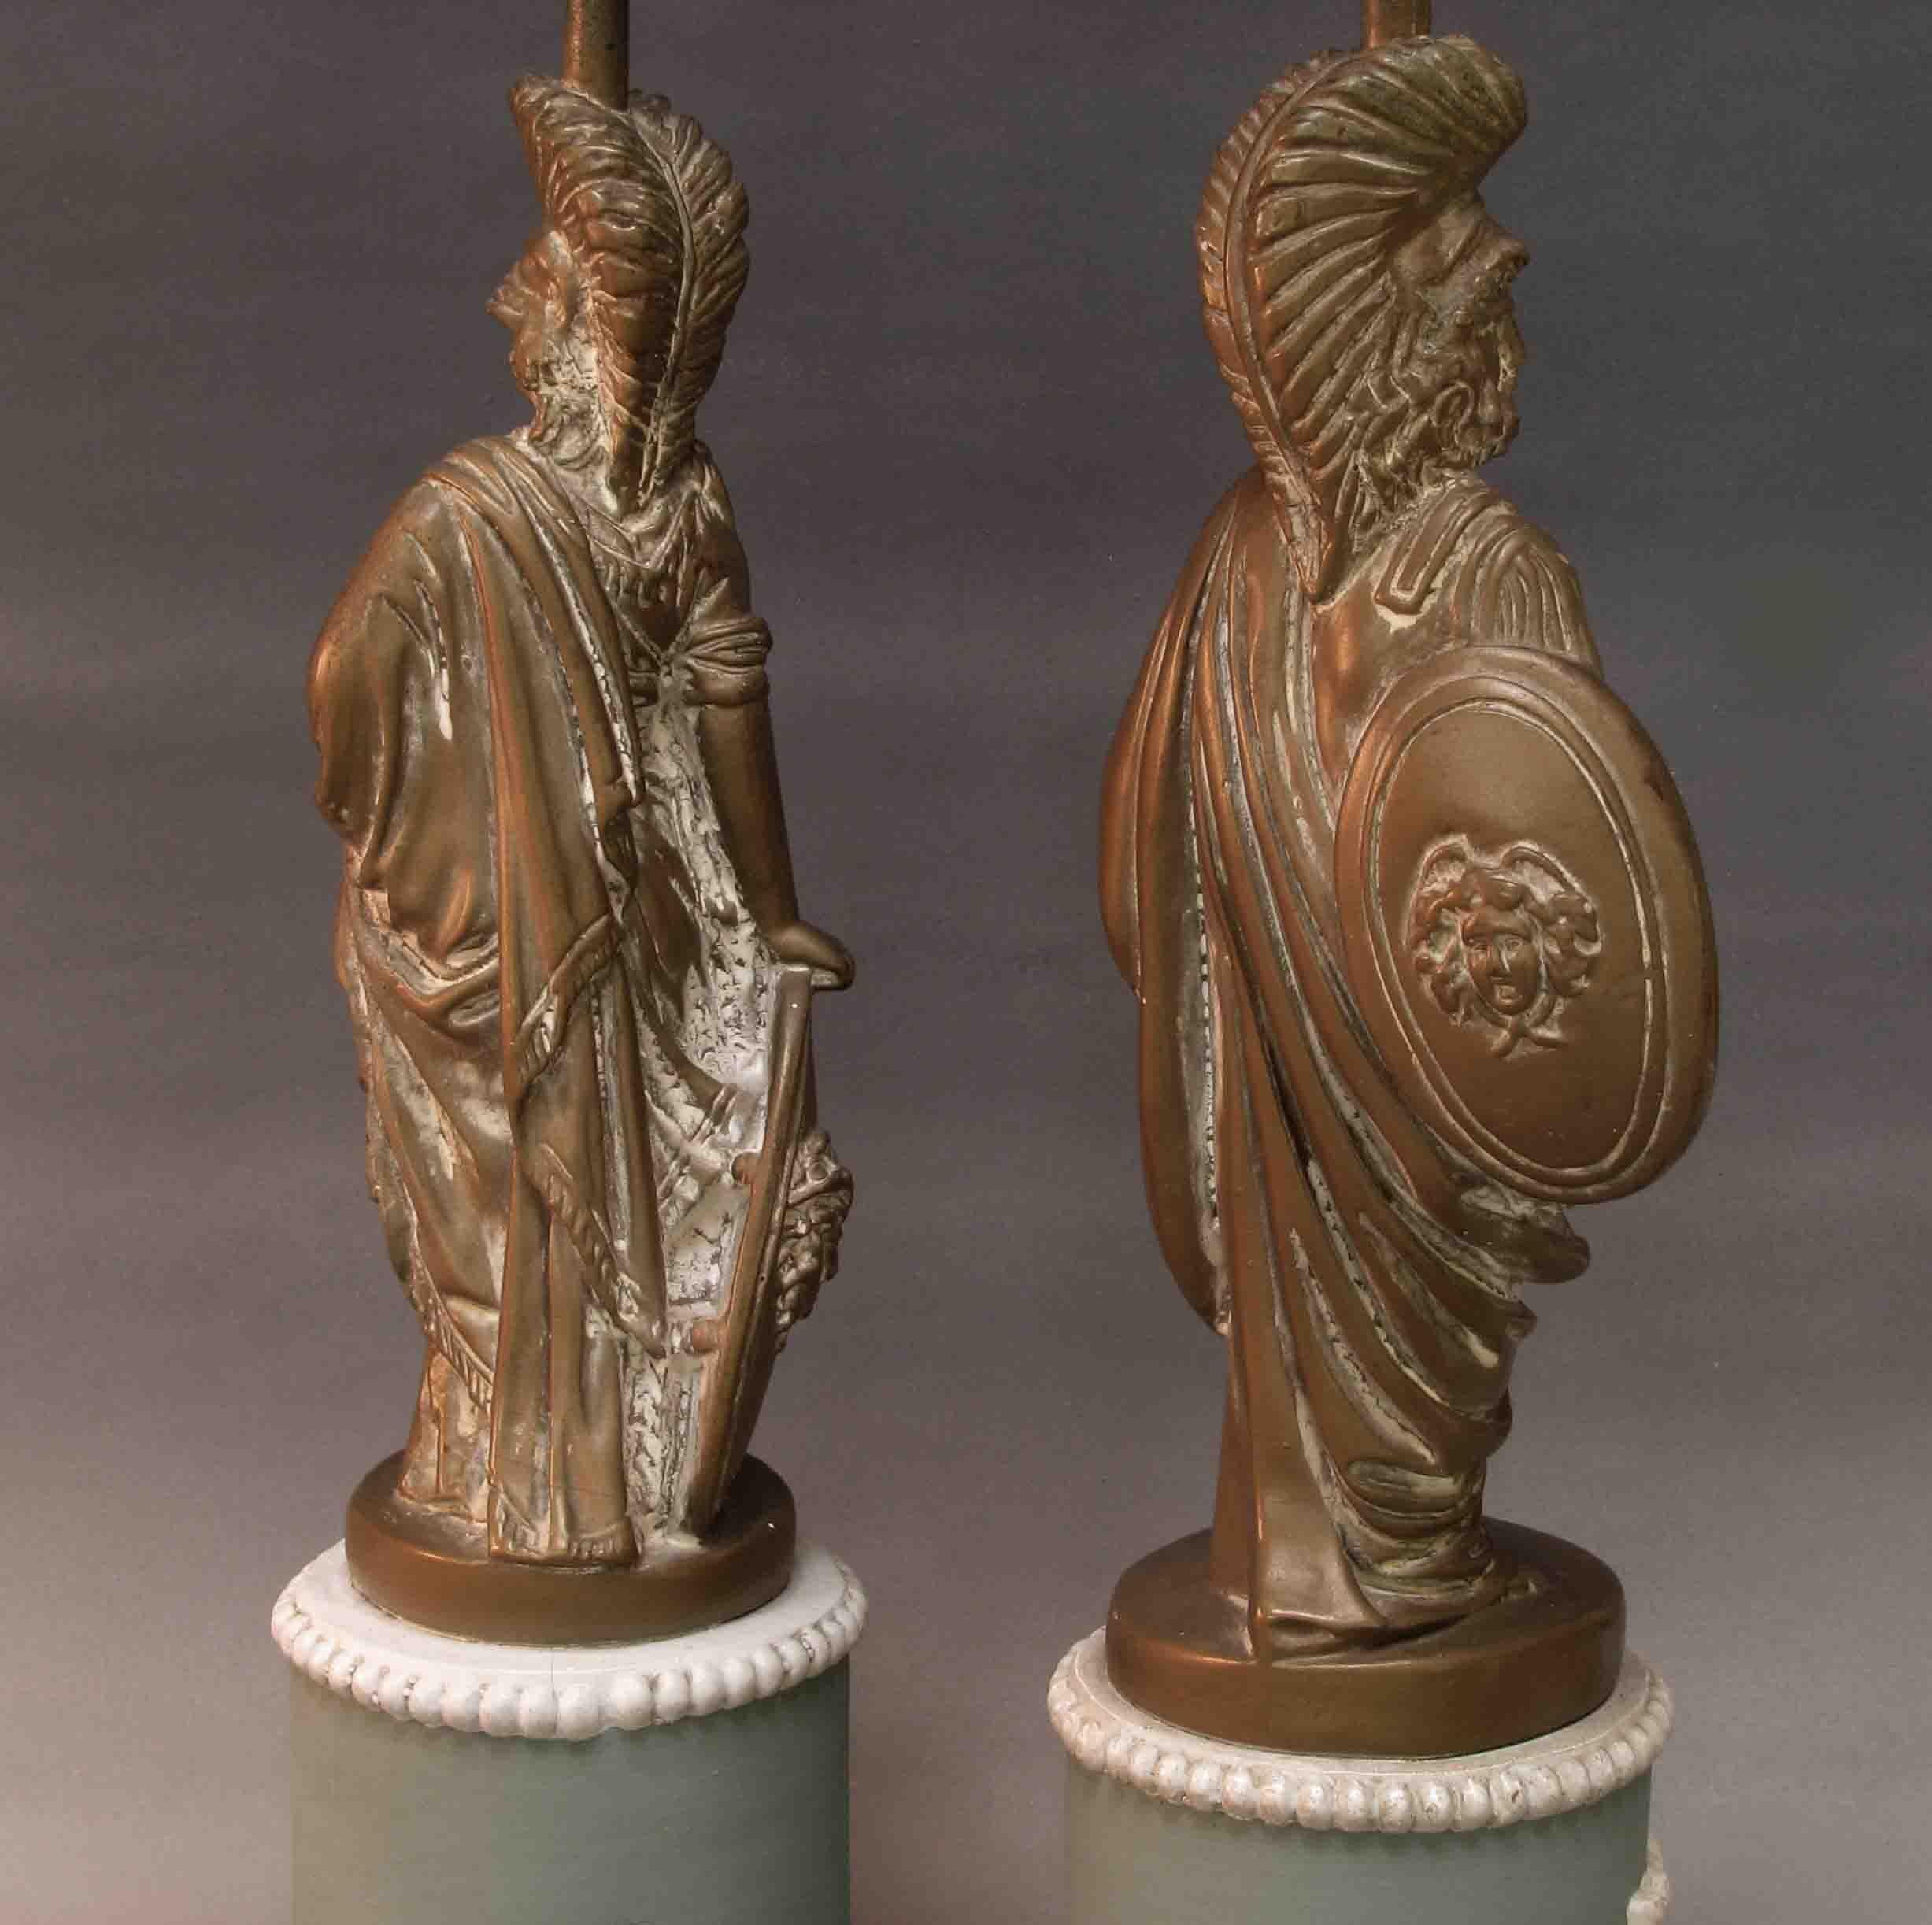 Pair of Patinated Plaster Neoclassical Figural Table Lamps by Sculptureline N.Y. In Good Condition For Sale In Ottawa, Ontario